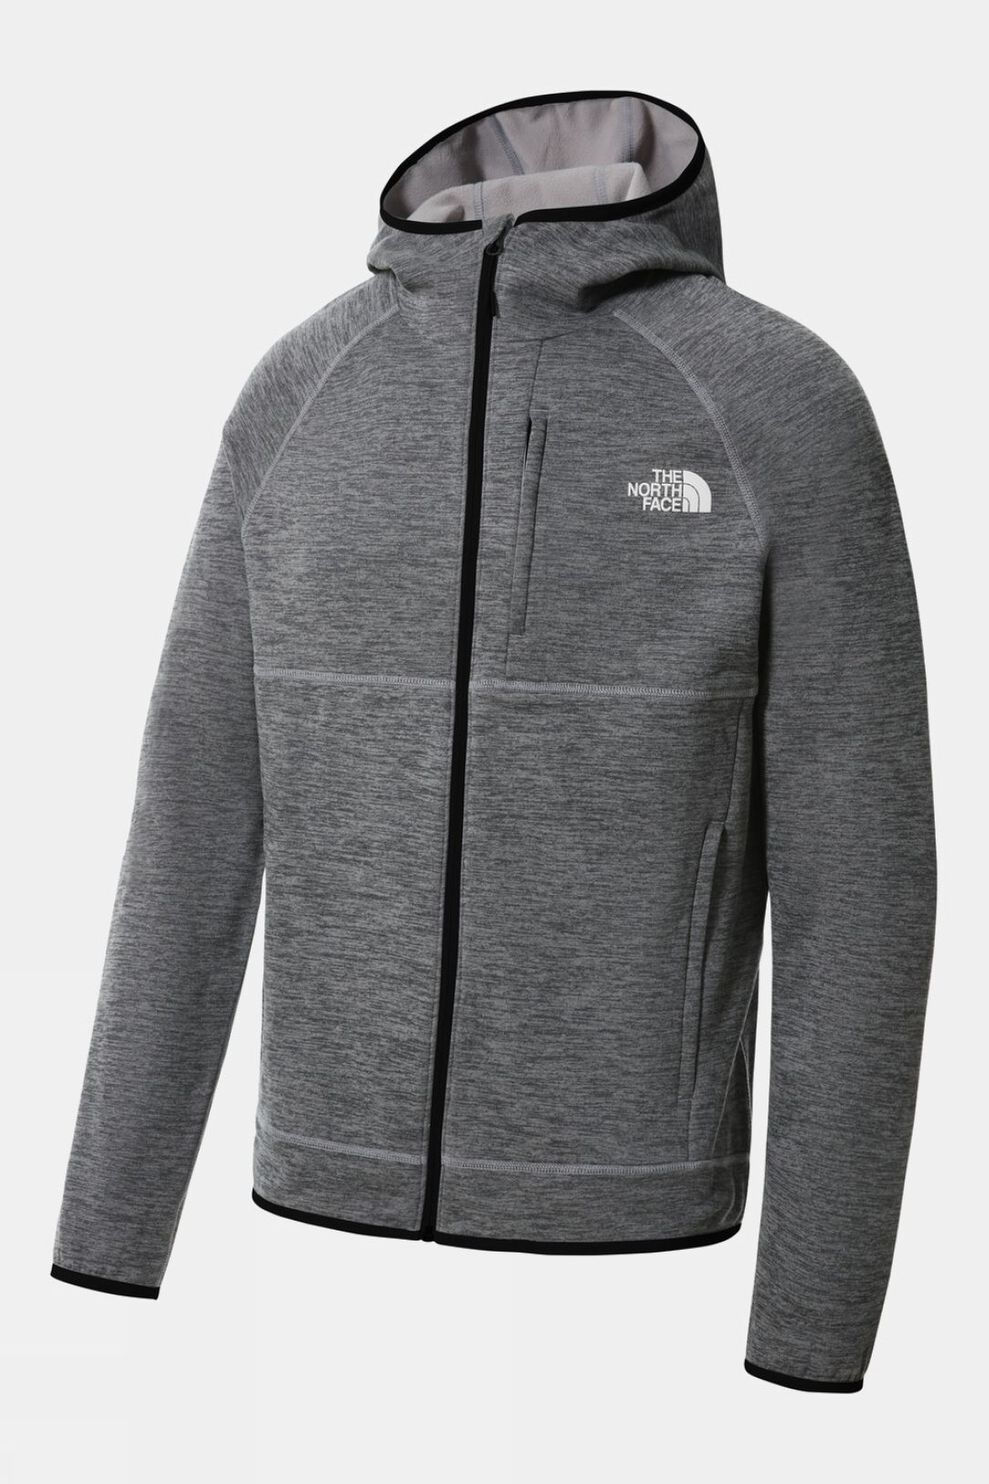 The North Face Mens Canyonlands Hooded Fleece Jacket